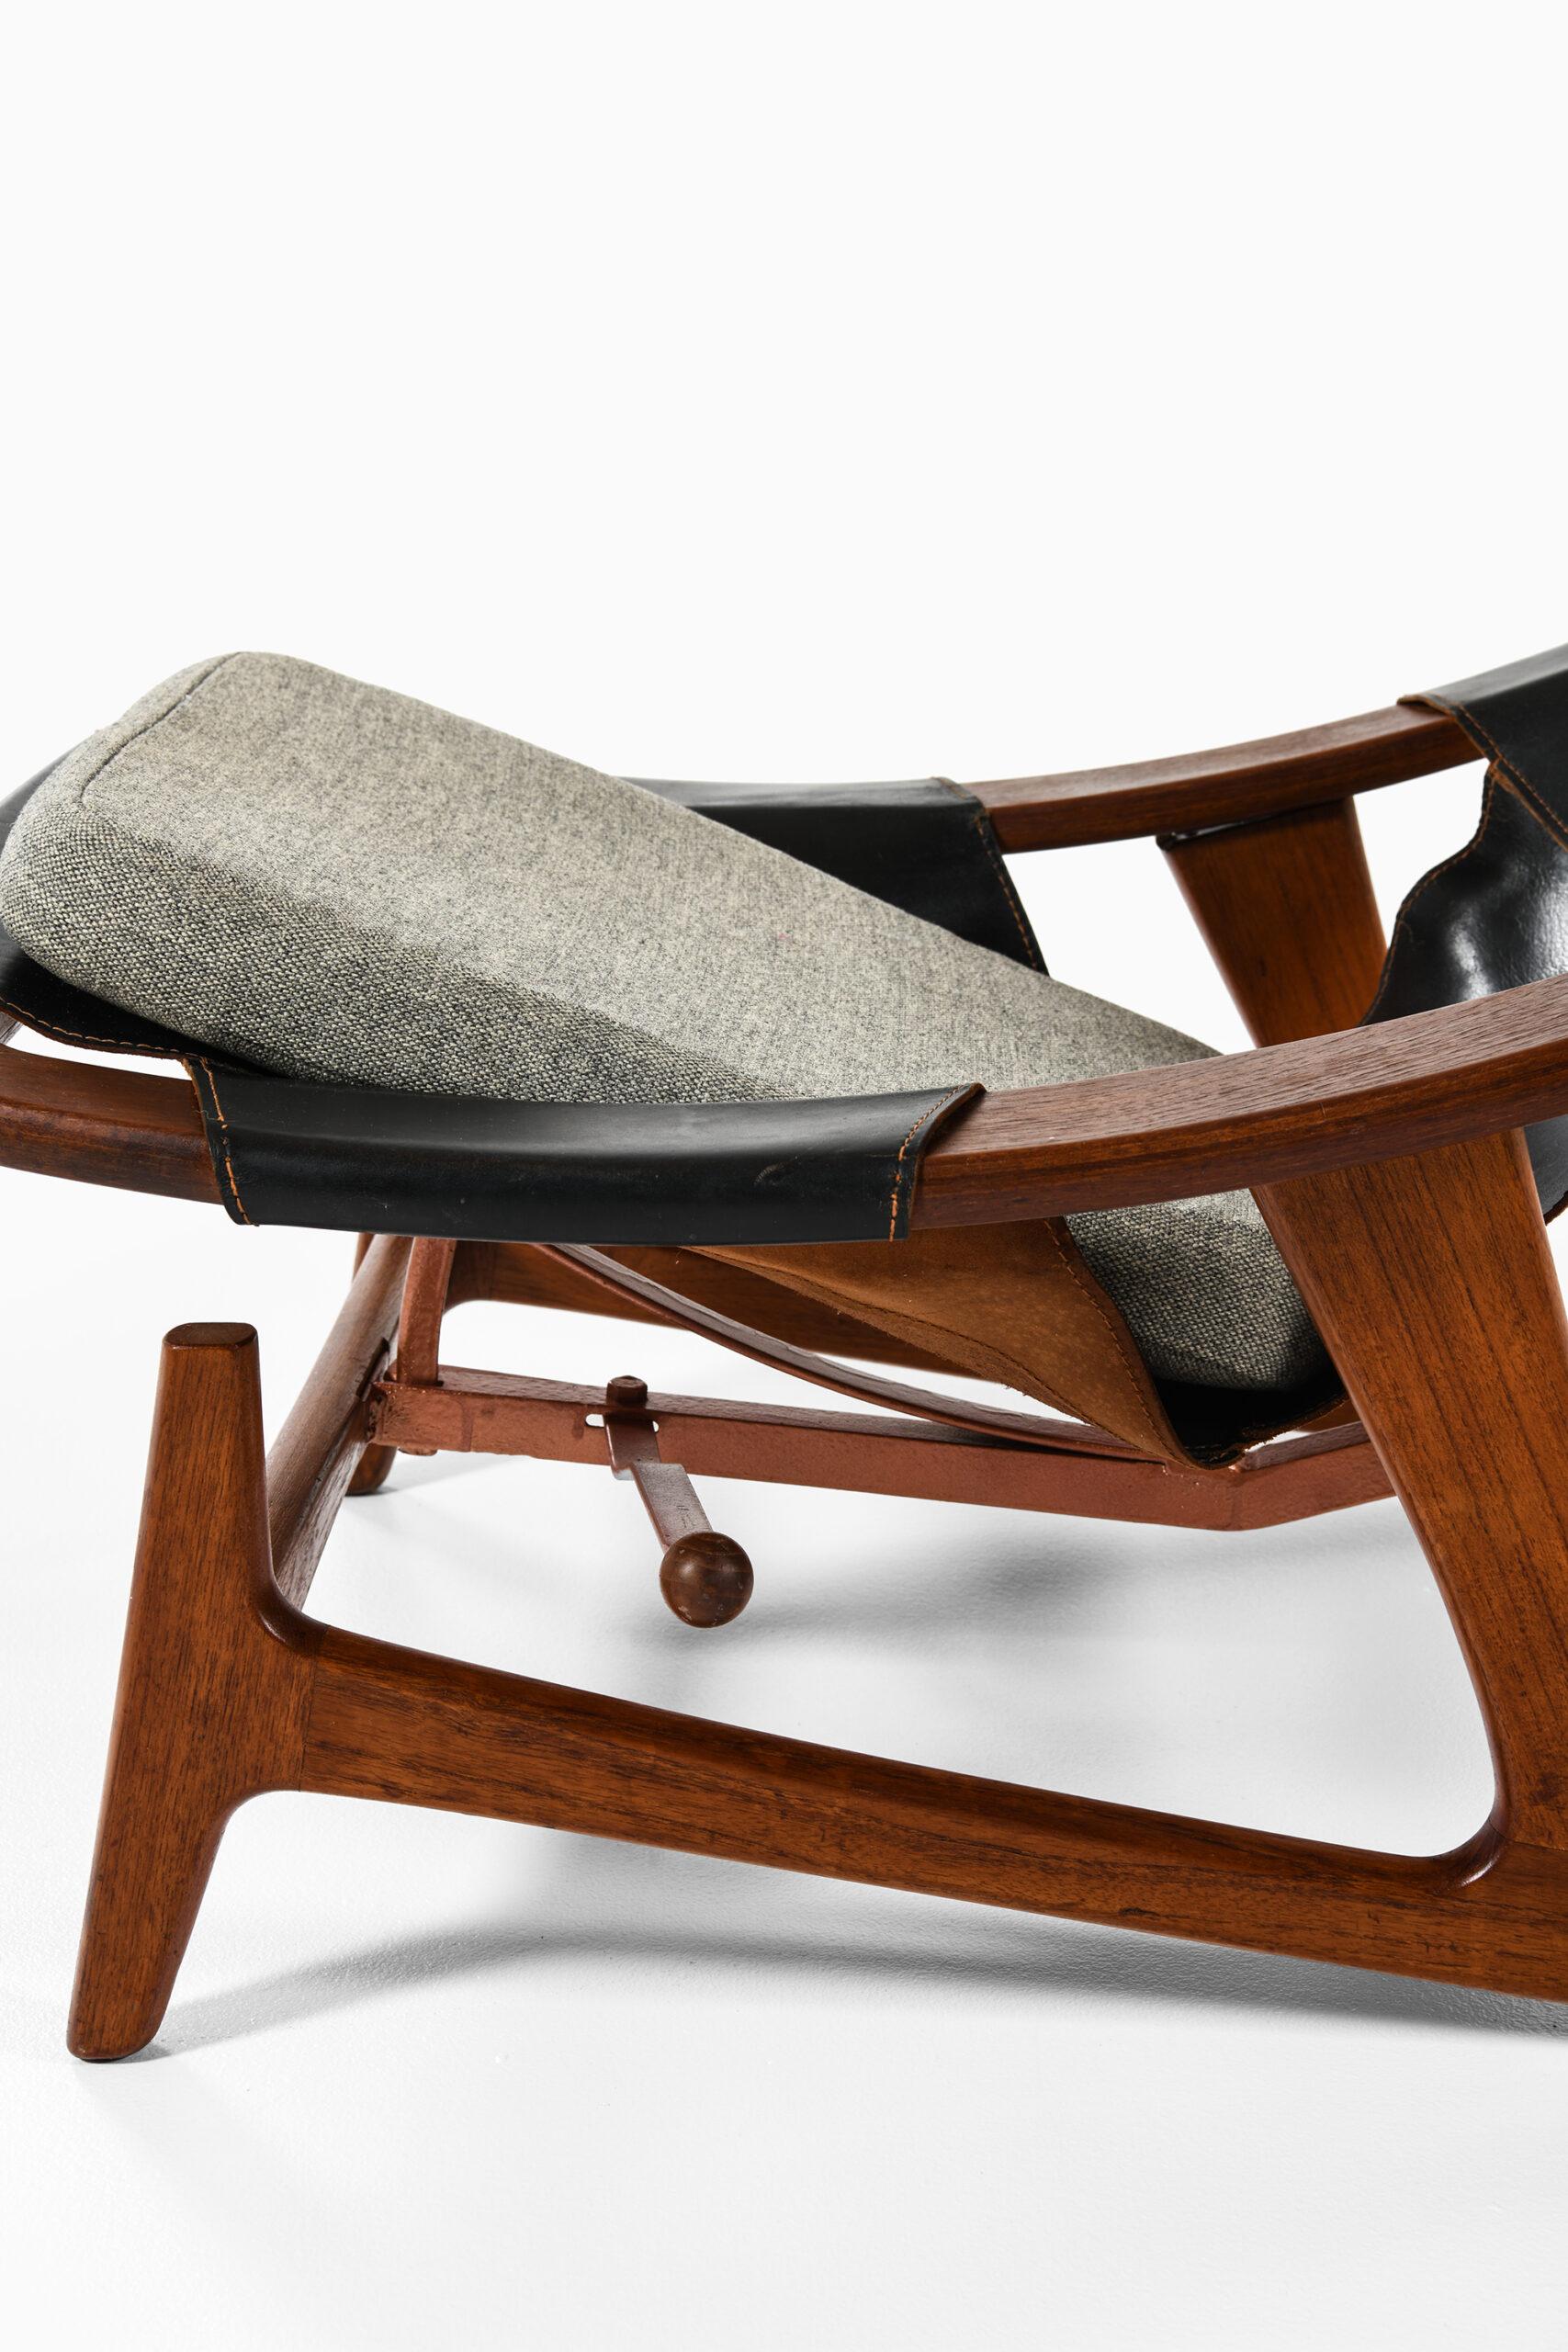 Mid-20th Century Arne Tidemand-Ruud Lounge Chairs Model 'Holmenkollen' Produced by Norcraft For Sale